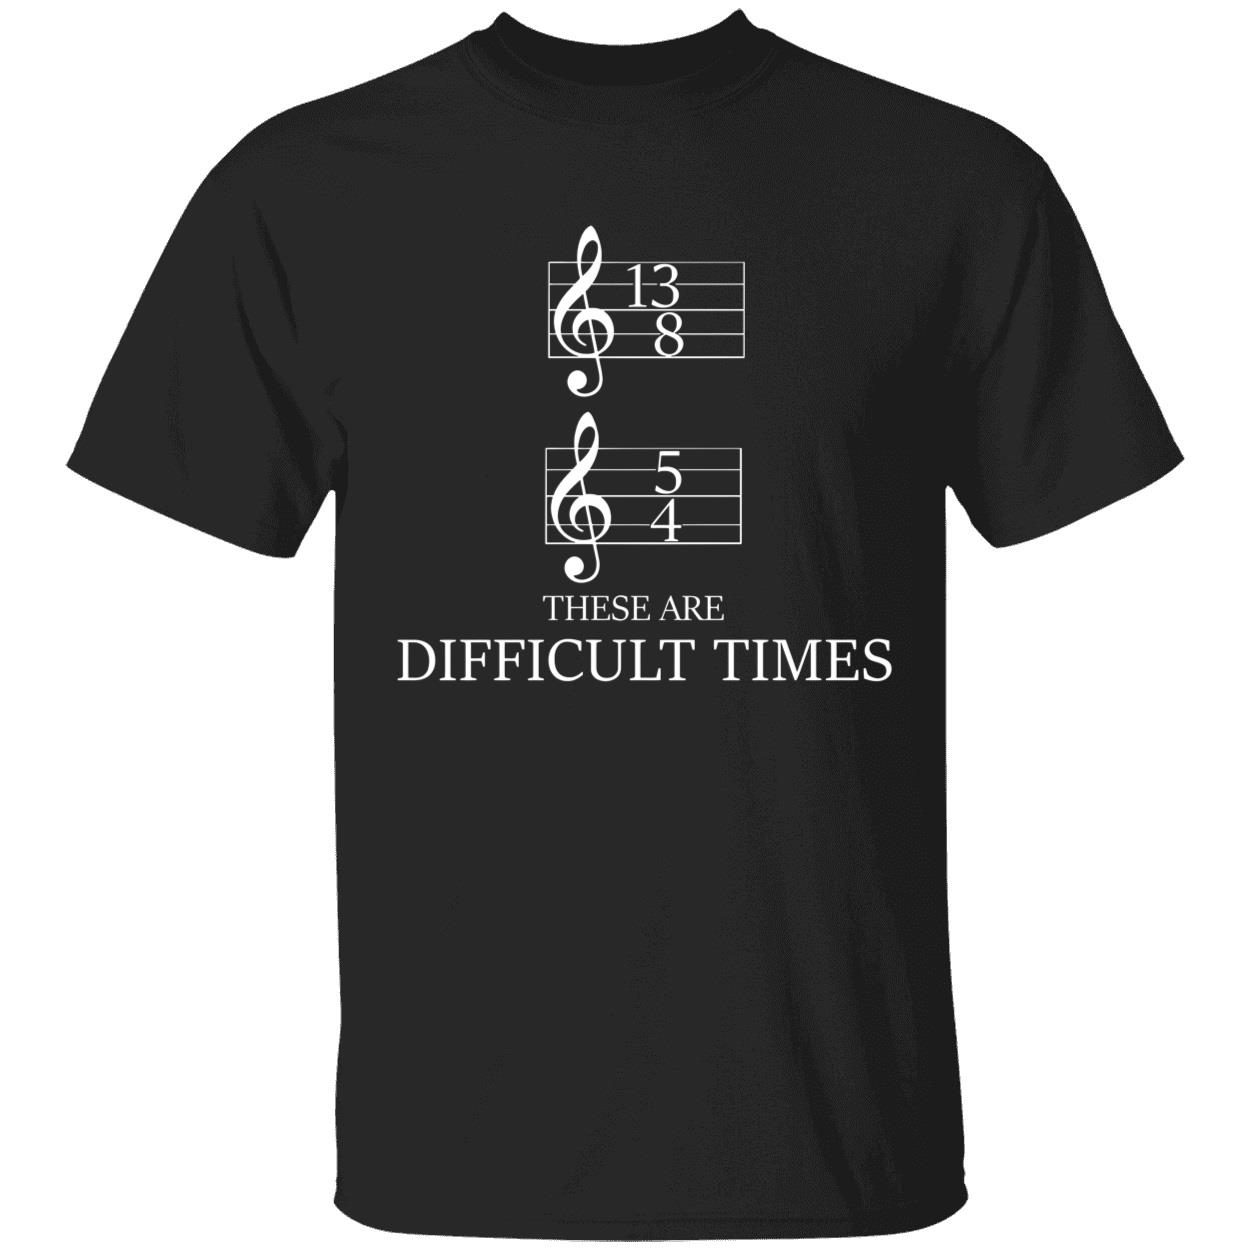 Music Notes 13/8 5/4 these are difficult times tee shirt - ShirtsOwl Office